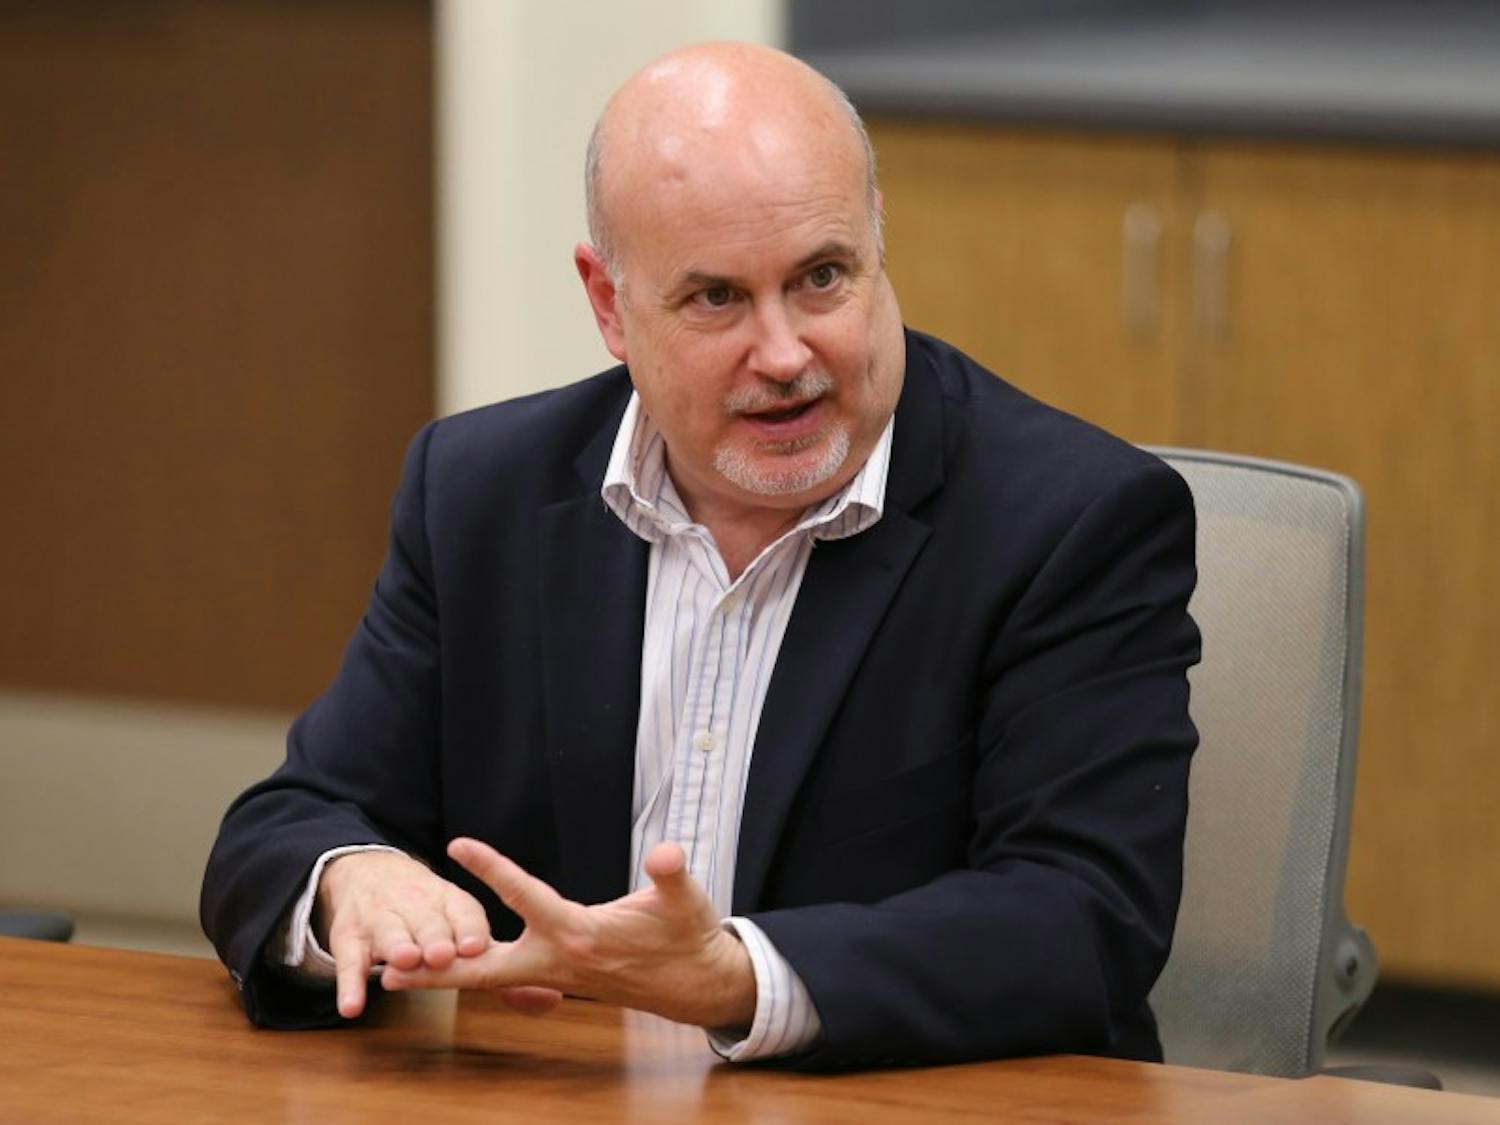 Rep. Mark Pocan, D-Wis., introduced a bipartisan bill Tuesday that hopes to assemble interest from both sides of the aisle.&nbsp;